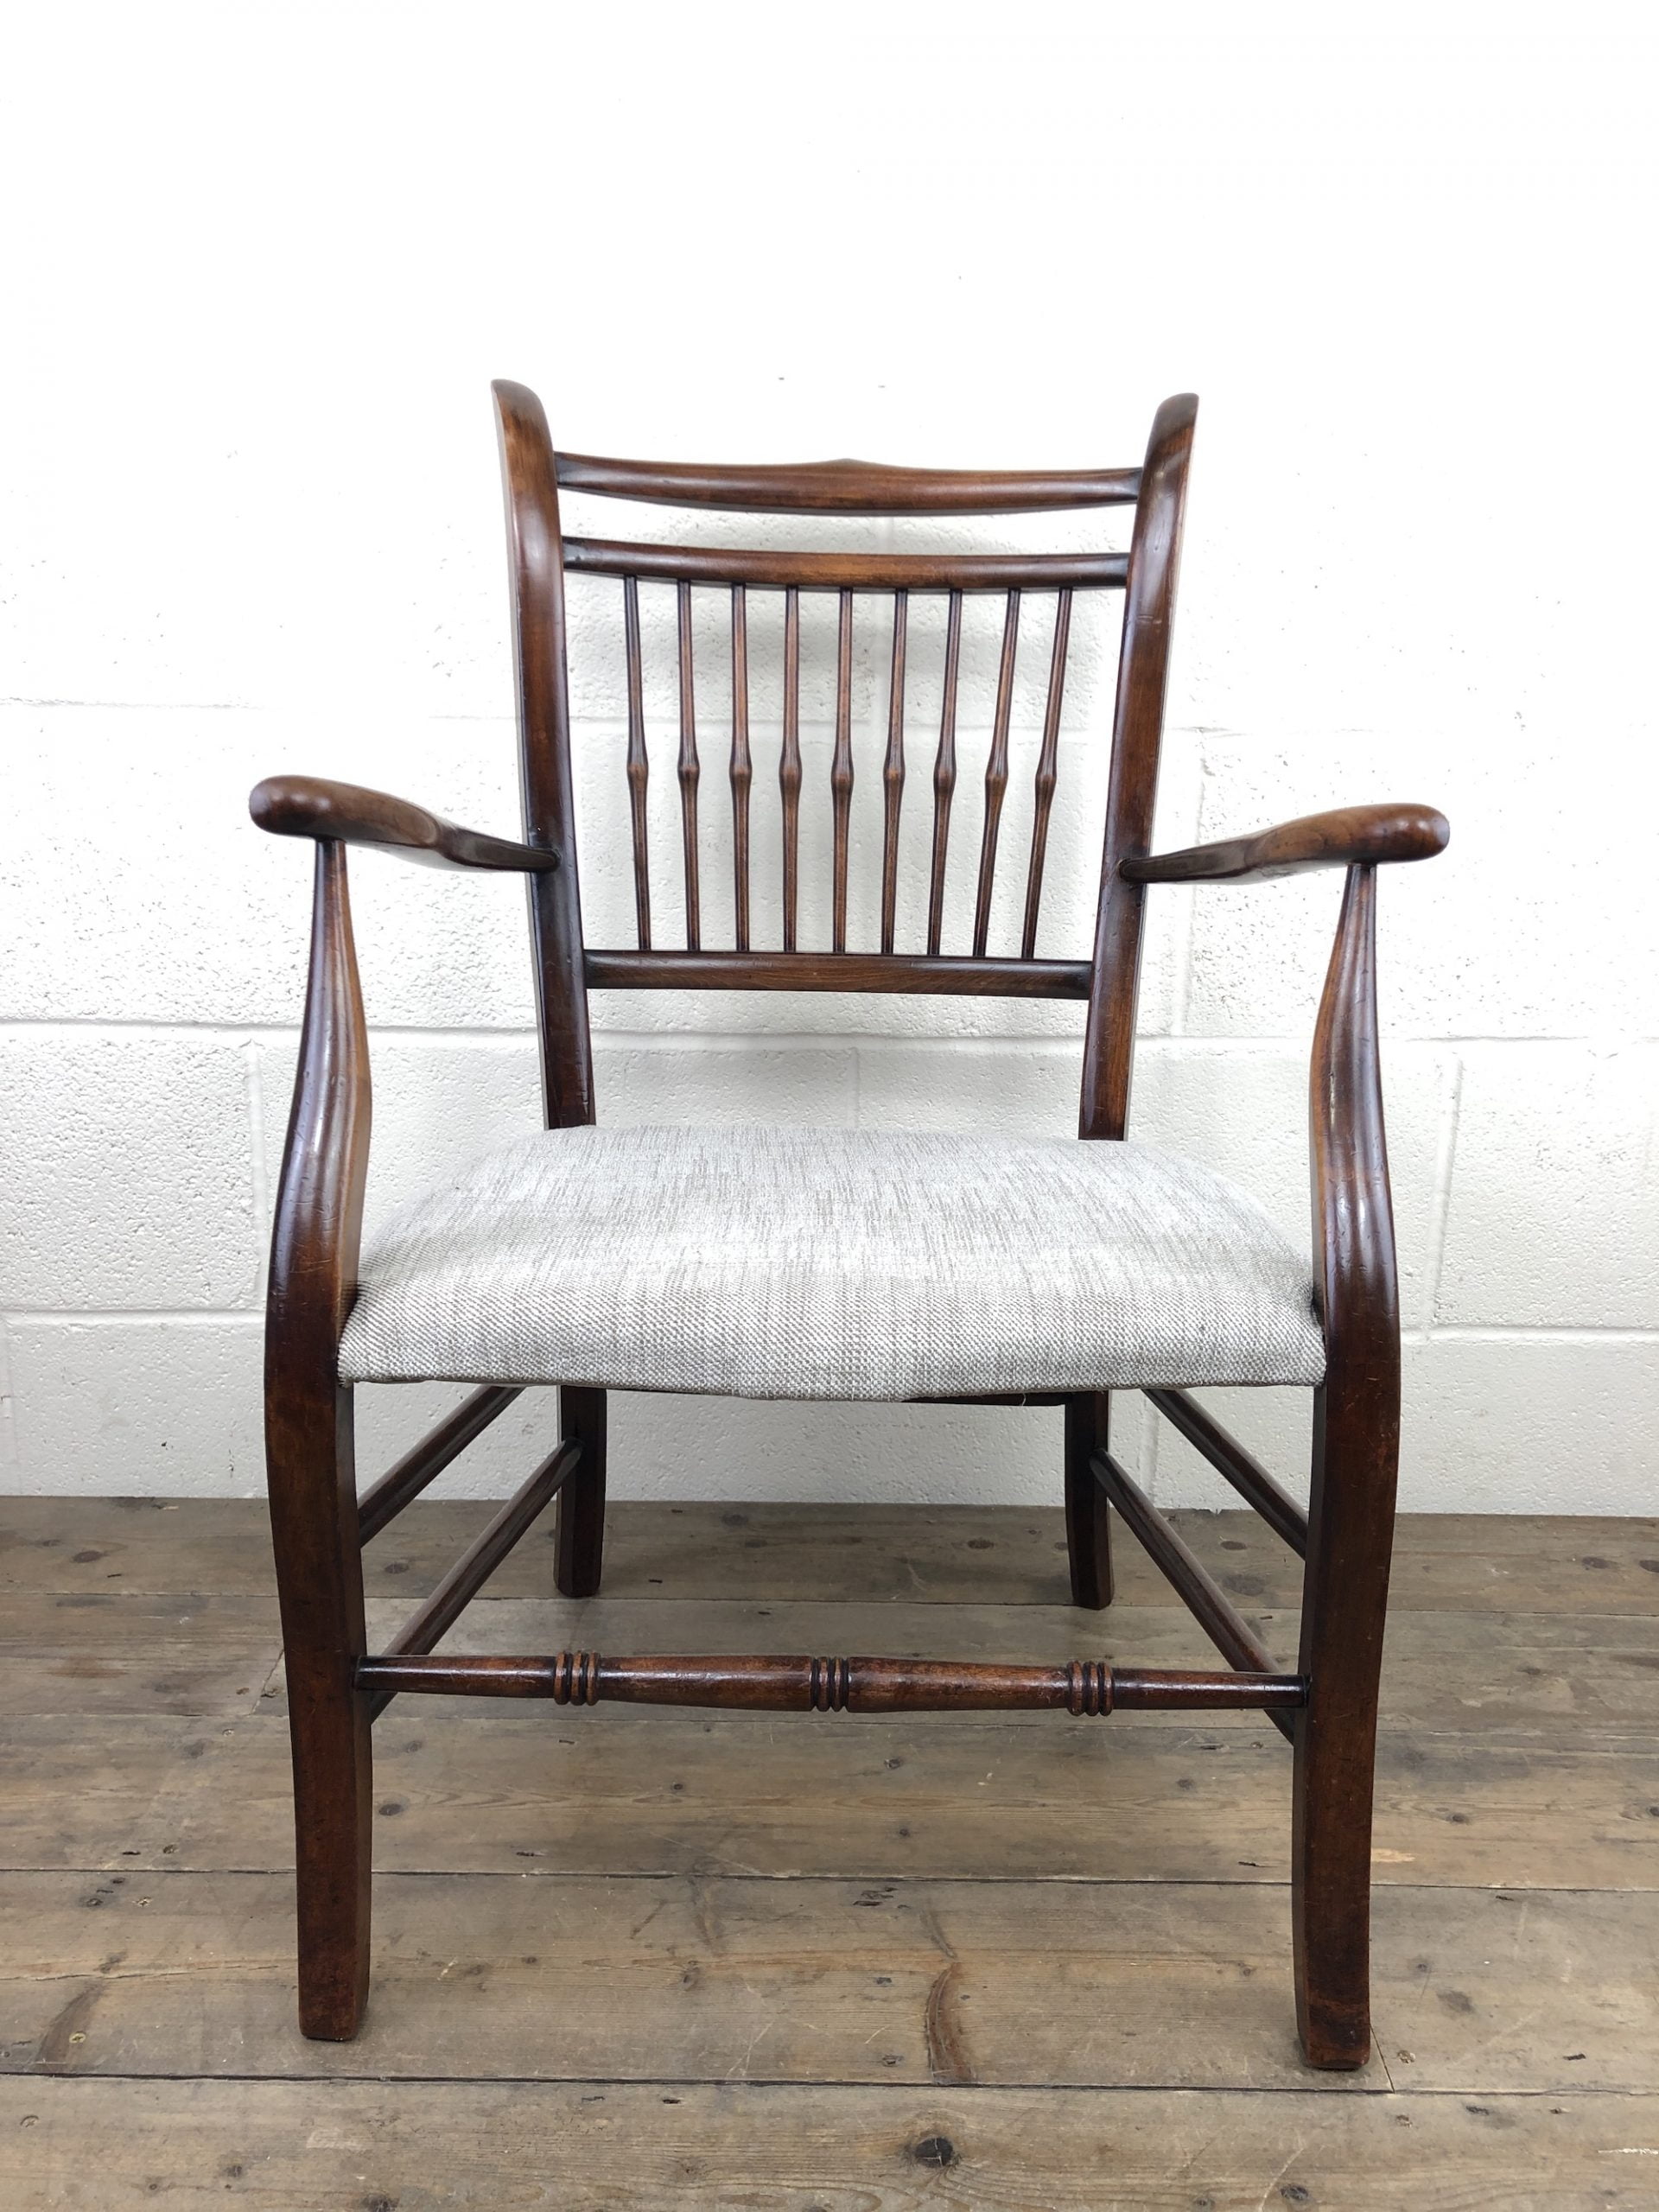 Antique 19th Century Spindle Back Chair